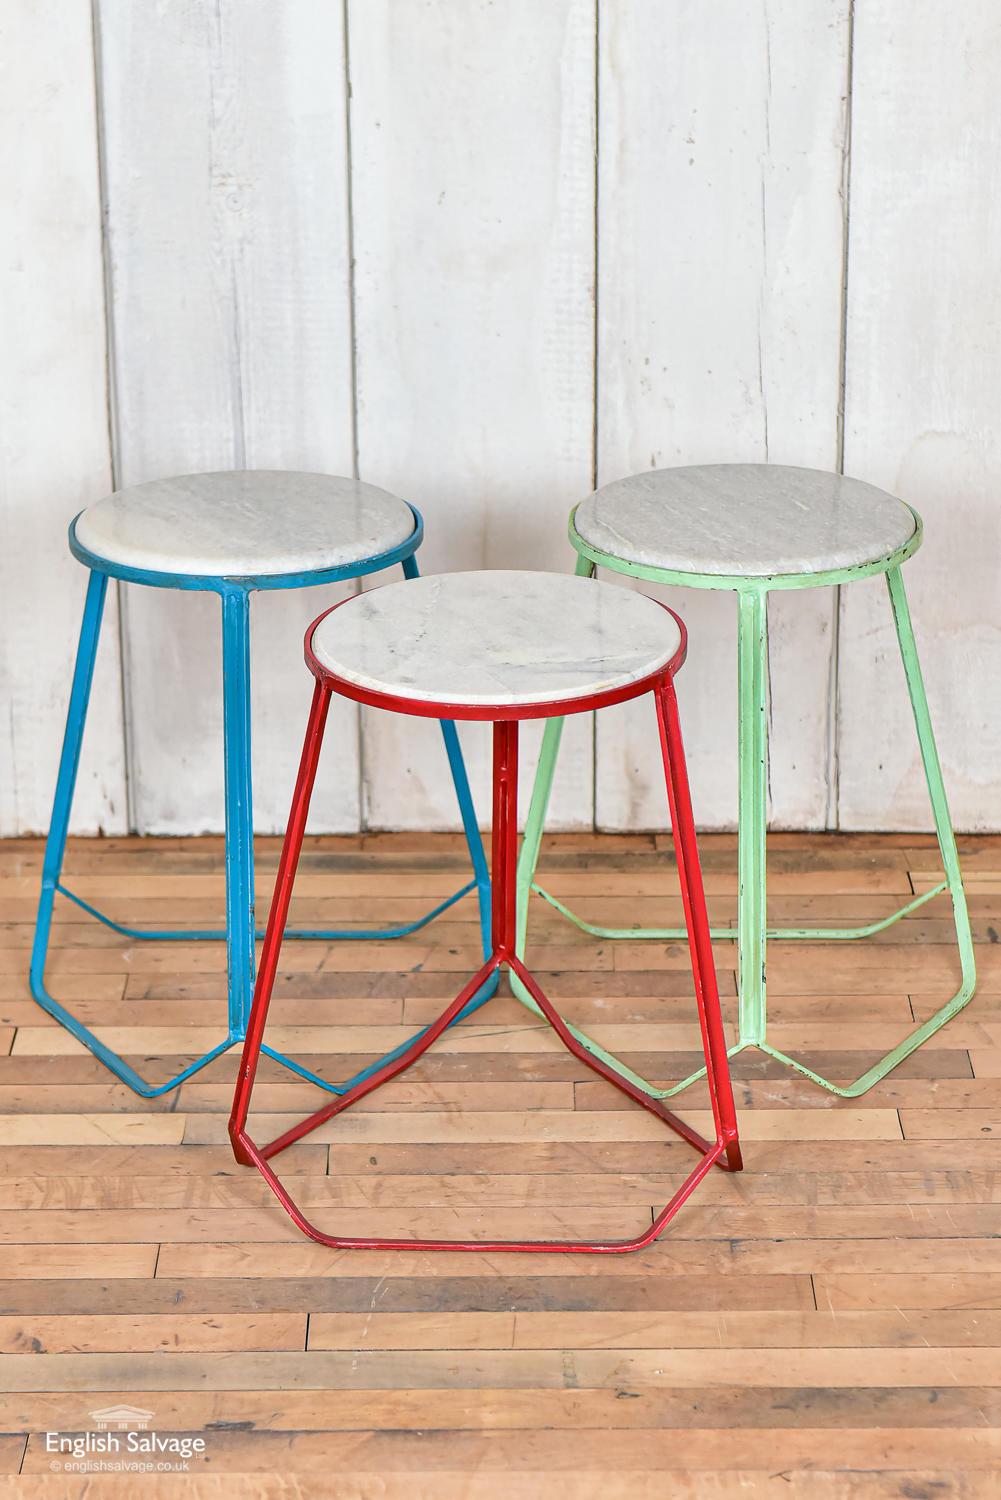 Attractive modernist or midcentury style steel three-cornered stools with marble seats, available in red, green and blue. The paint has a distressed look with some chips and scratches, lending an appealing weathered appearance.